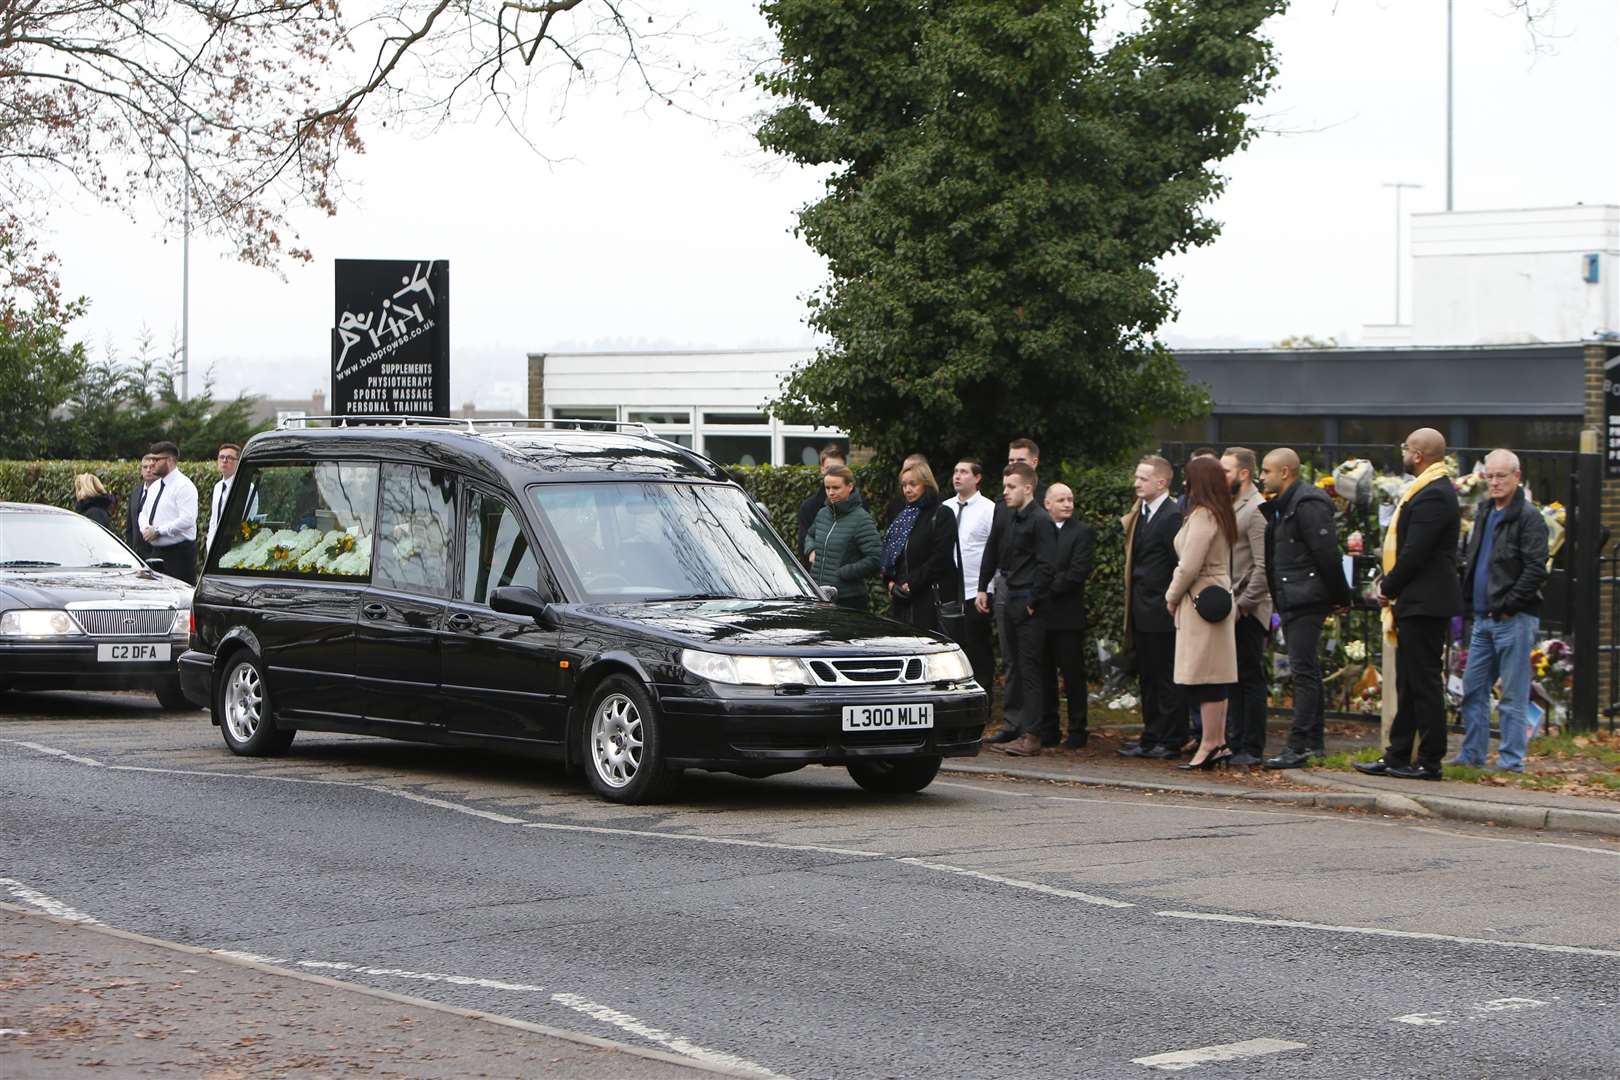 Mourners gather outside the club in Armstong Road